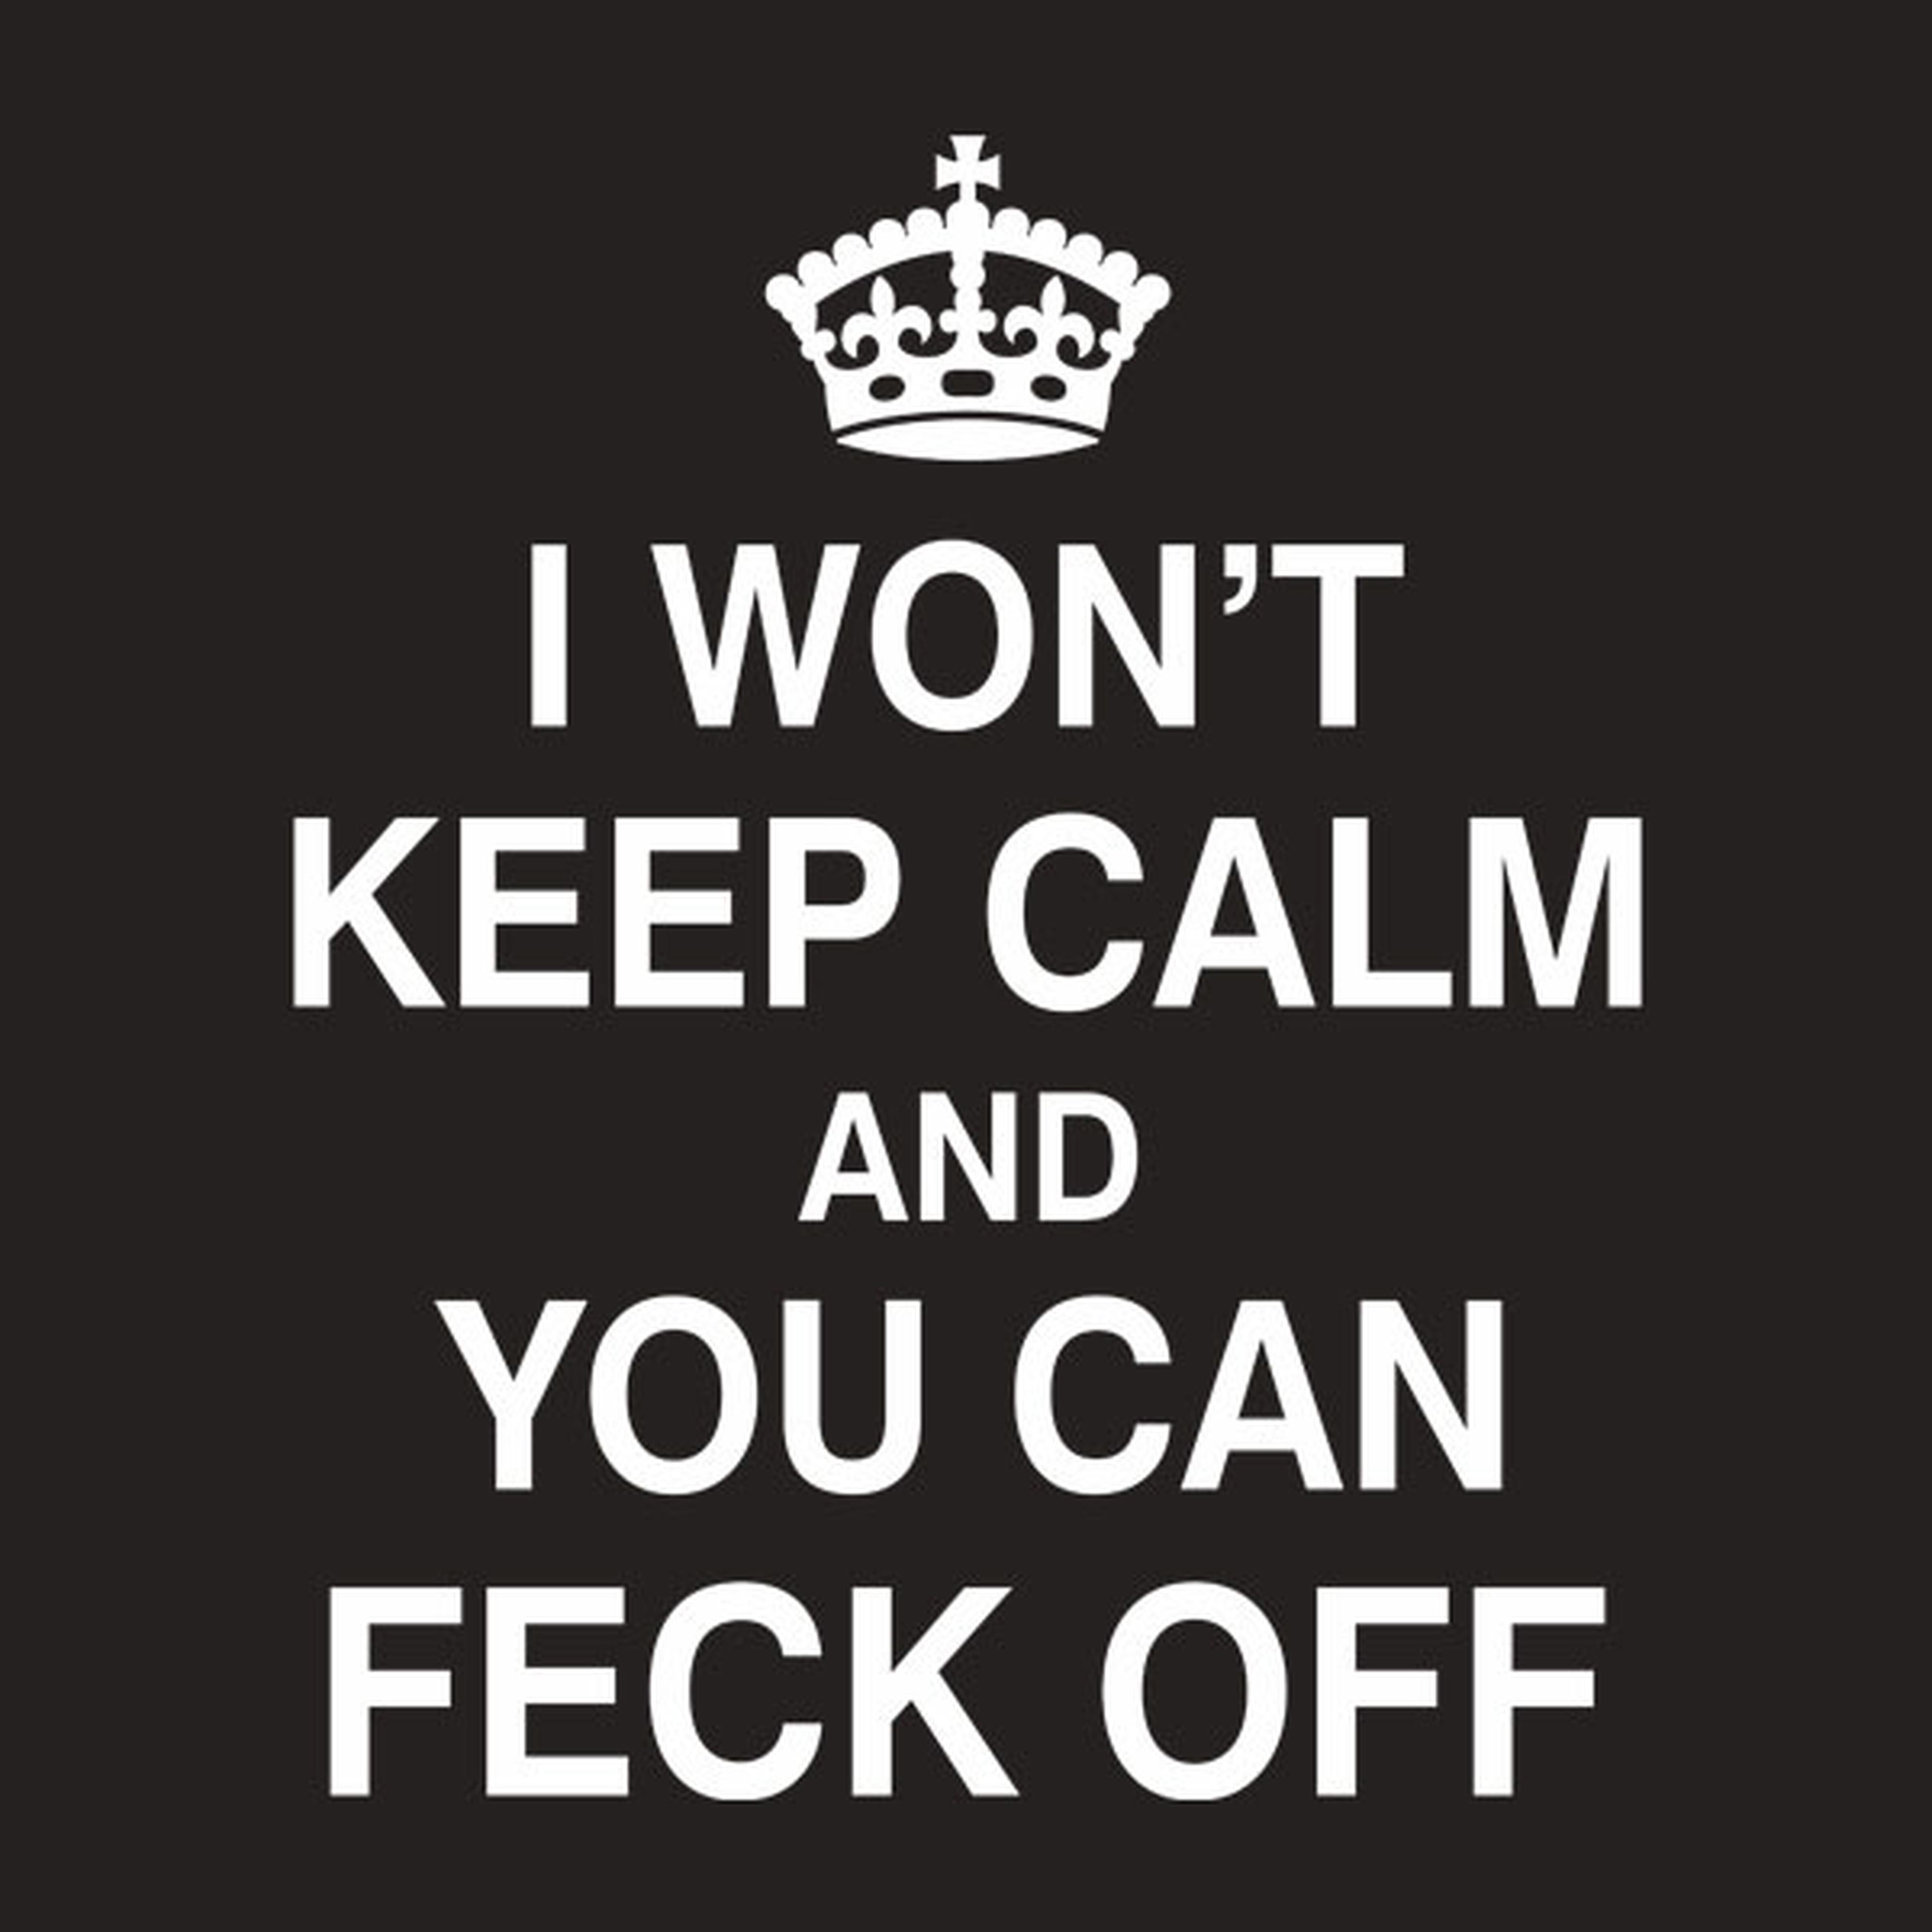 I won't keep calm and you can feck off - T-shirt